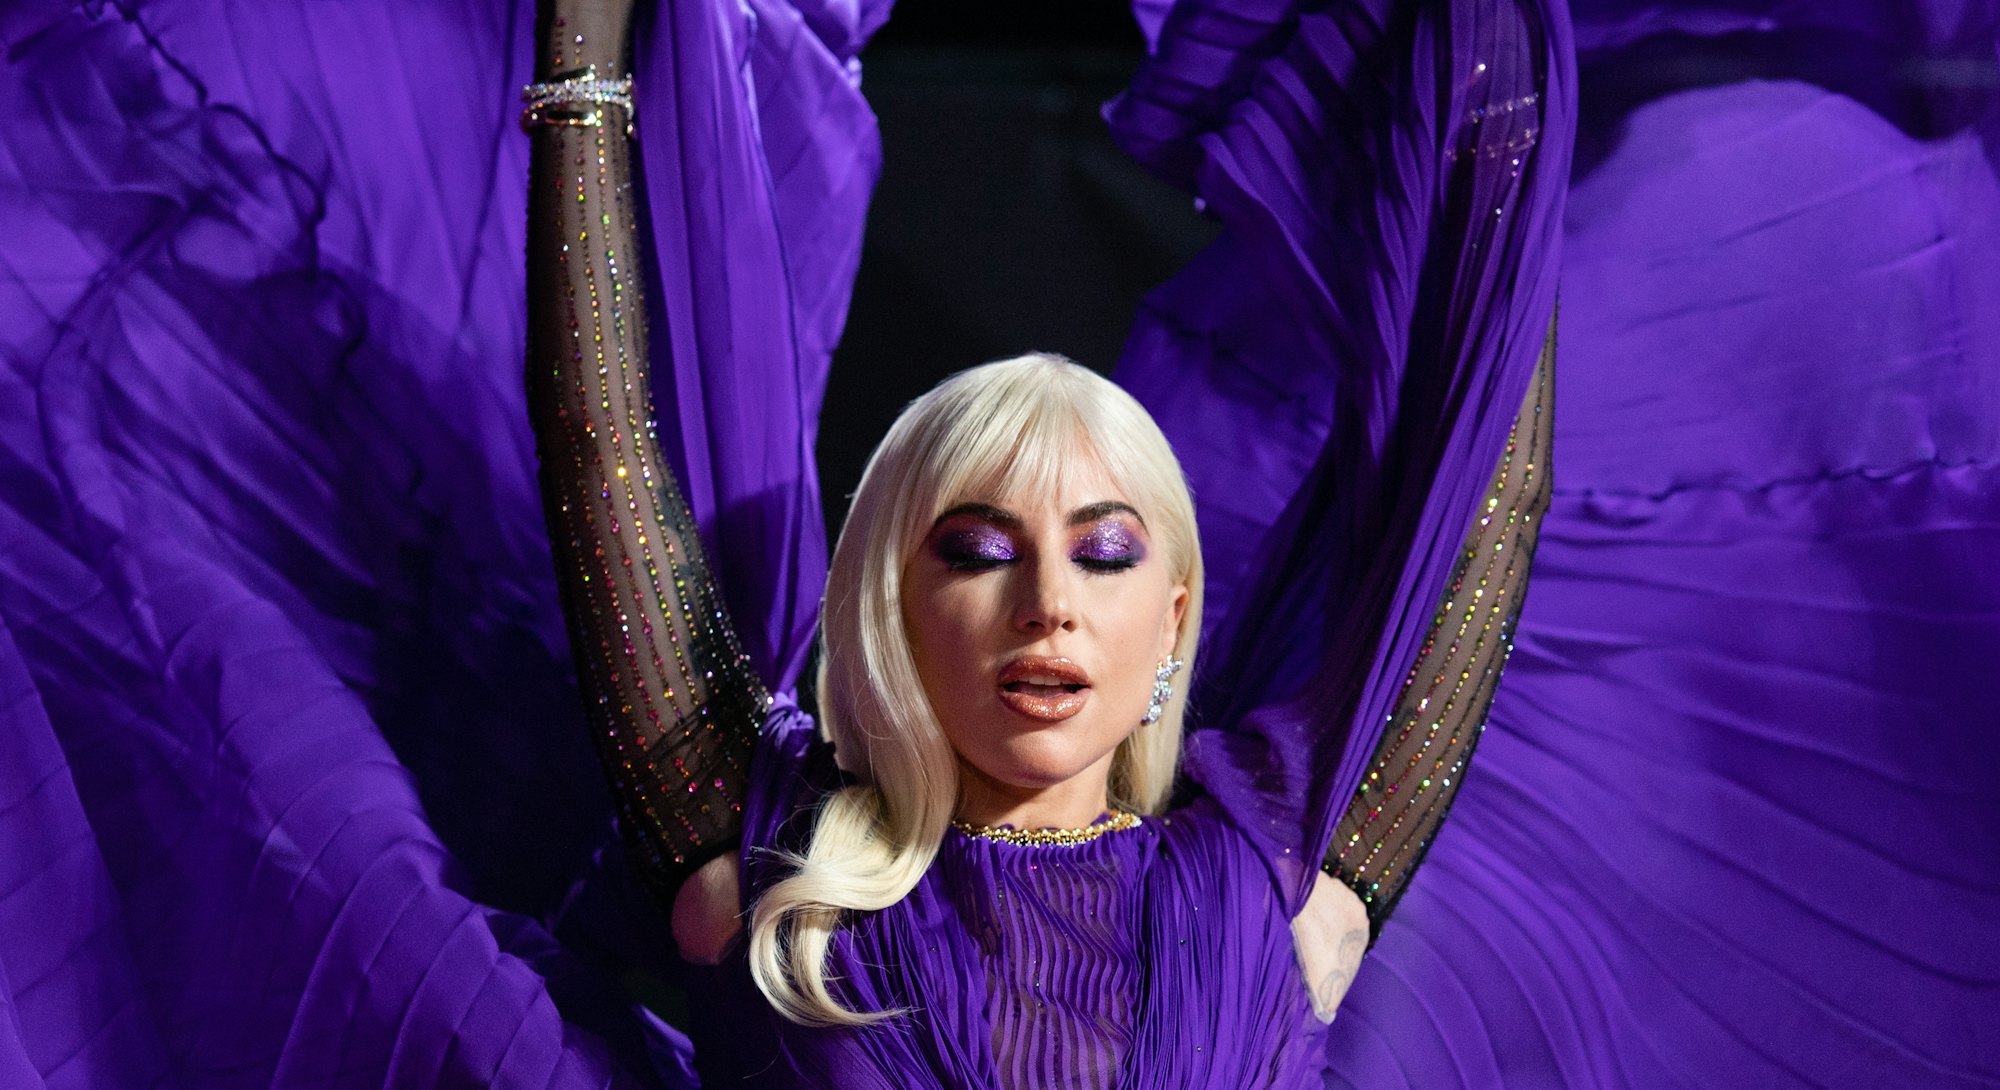 Lady Gaga's 'House Of Gucci' premiere dresses were a sight to behold. Ahead, see her most memorable ...